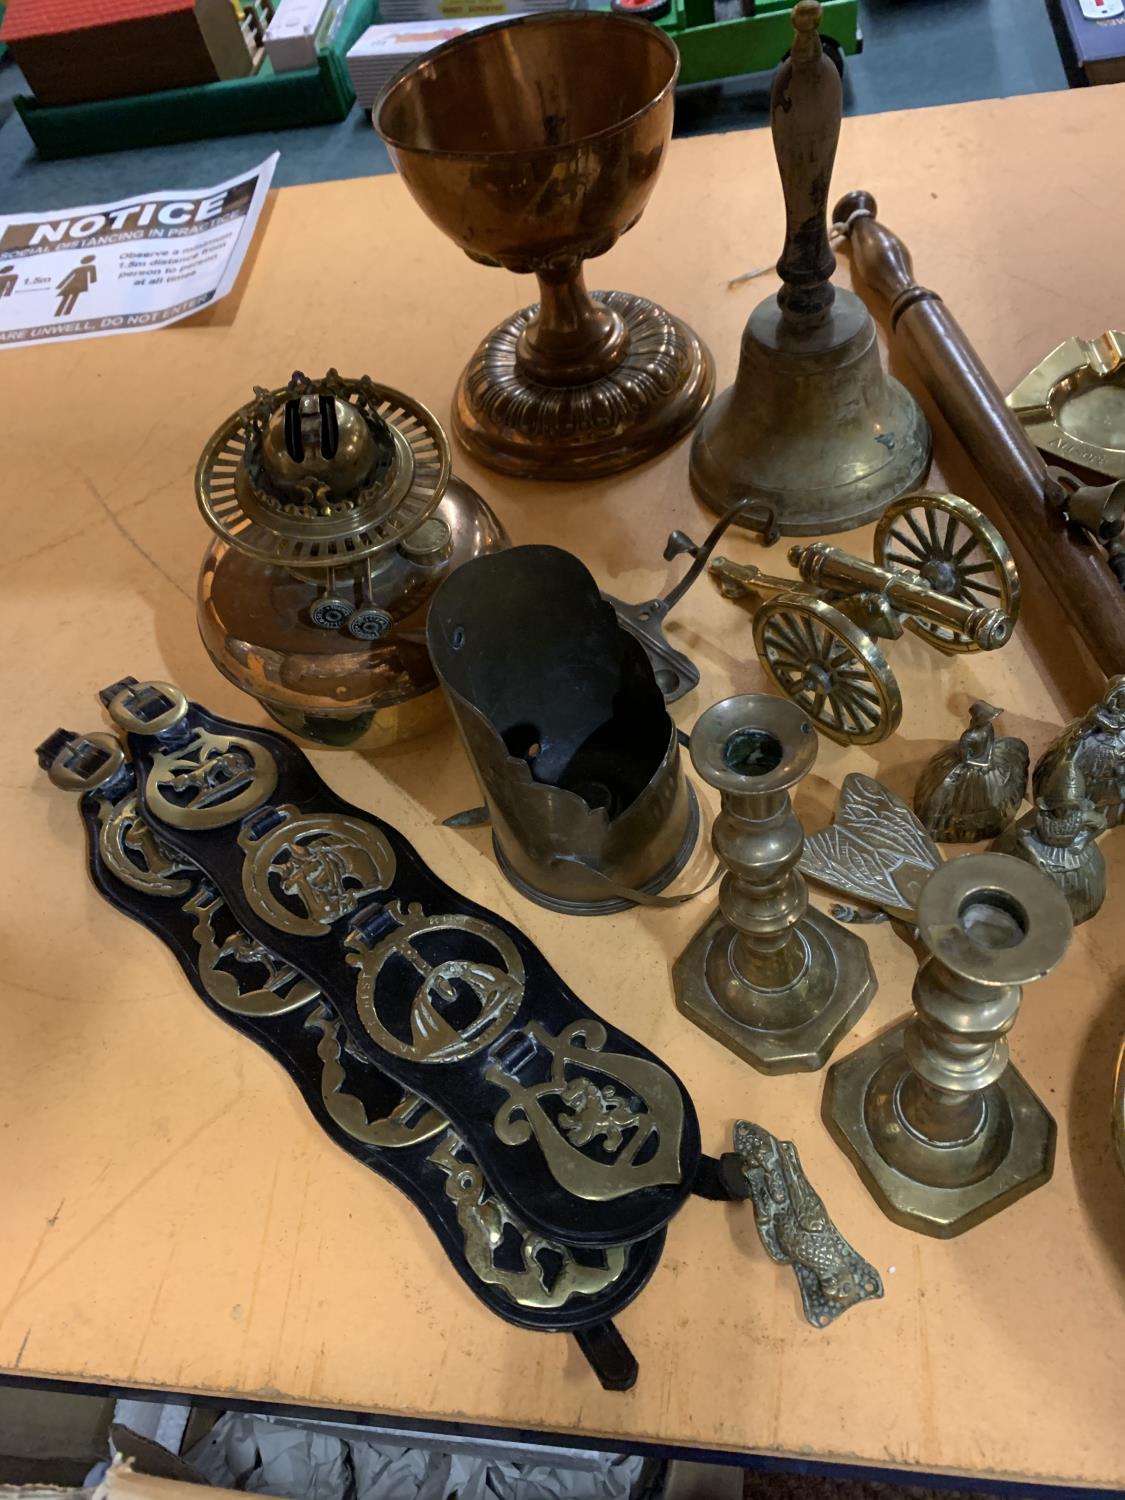 A LARGE QUANTITY OF BRASSWARE TO INCLUDE A BELL, HORSE BRASSES, KETTLE, CANDLESTICKS, CANNON, LAMP - Image 12 of 12